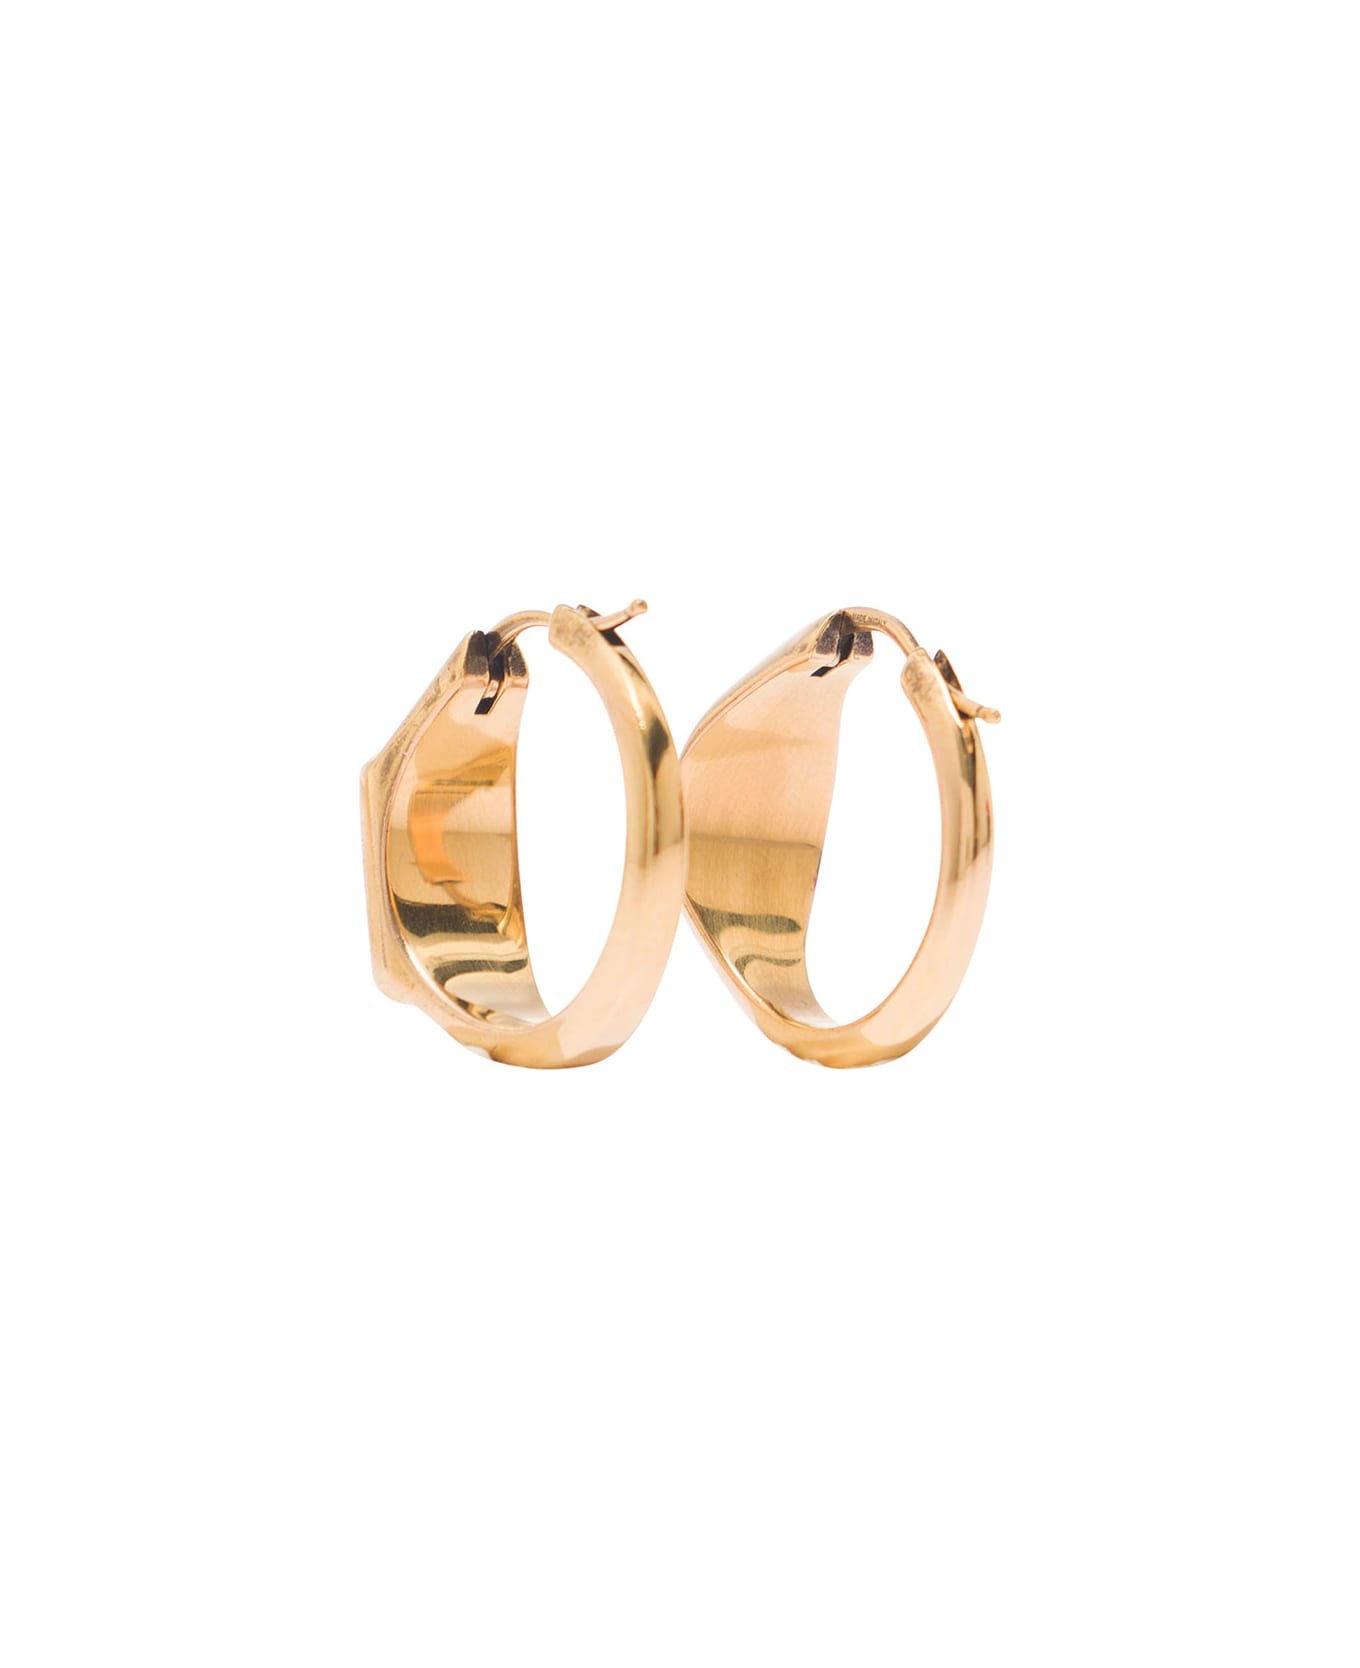 Alexander McQueen Gold-colored Hoops Earrings With Skull And Logo Engraved In Brass Woman - Metallic